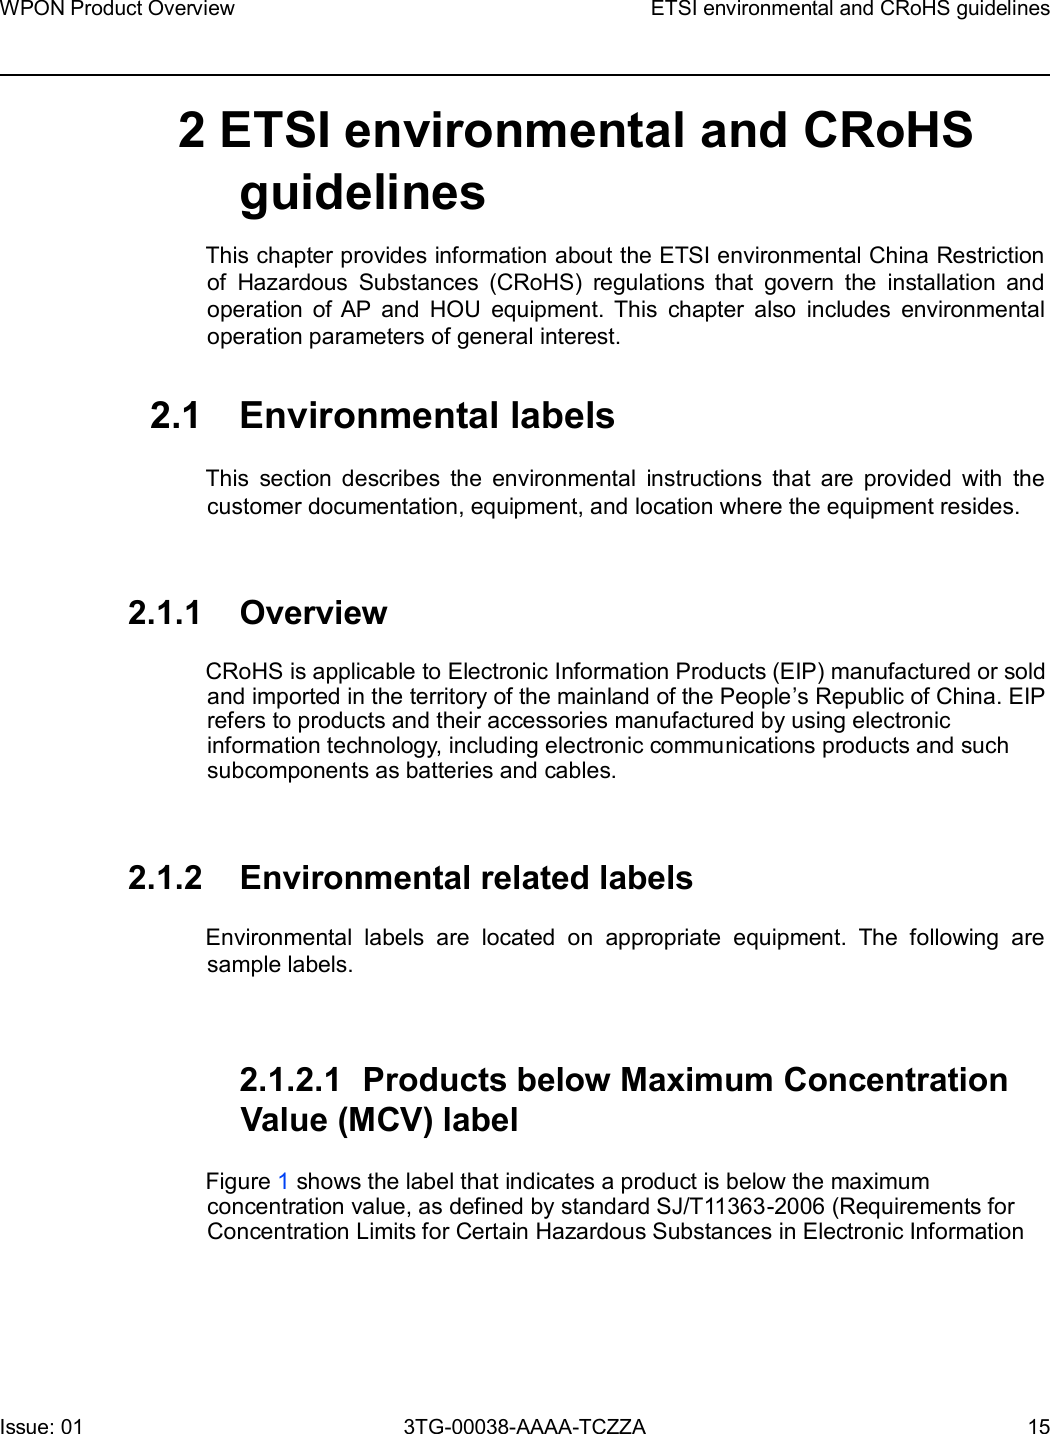 Page 15 of Nokia Bell 7577WPONAPAC WPON User Manual WPON Product Overview